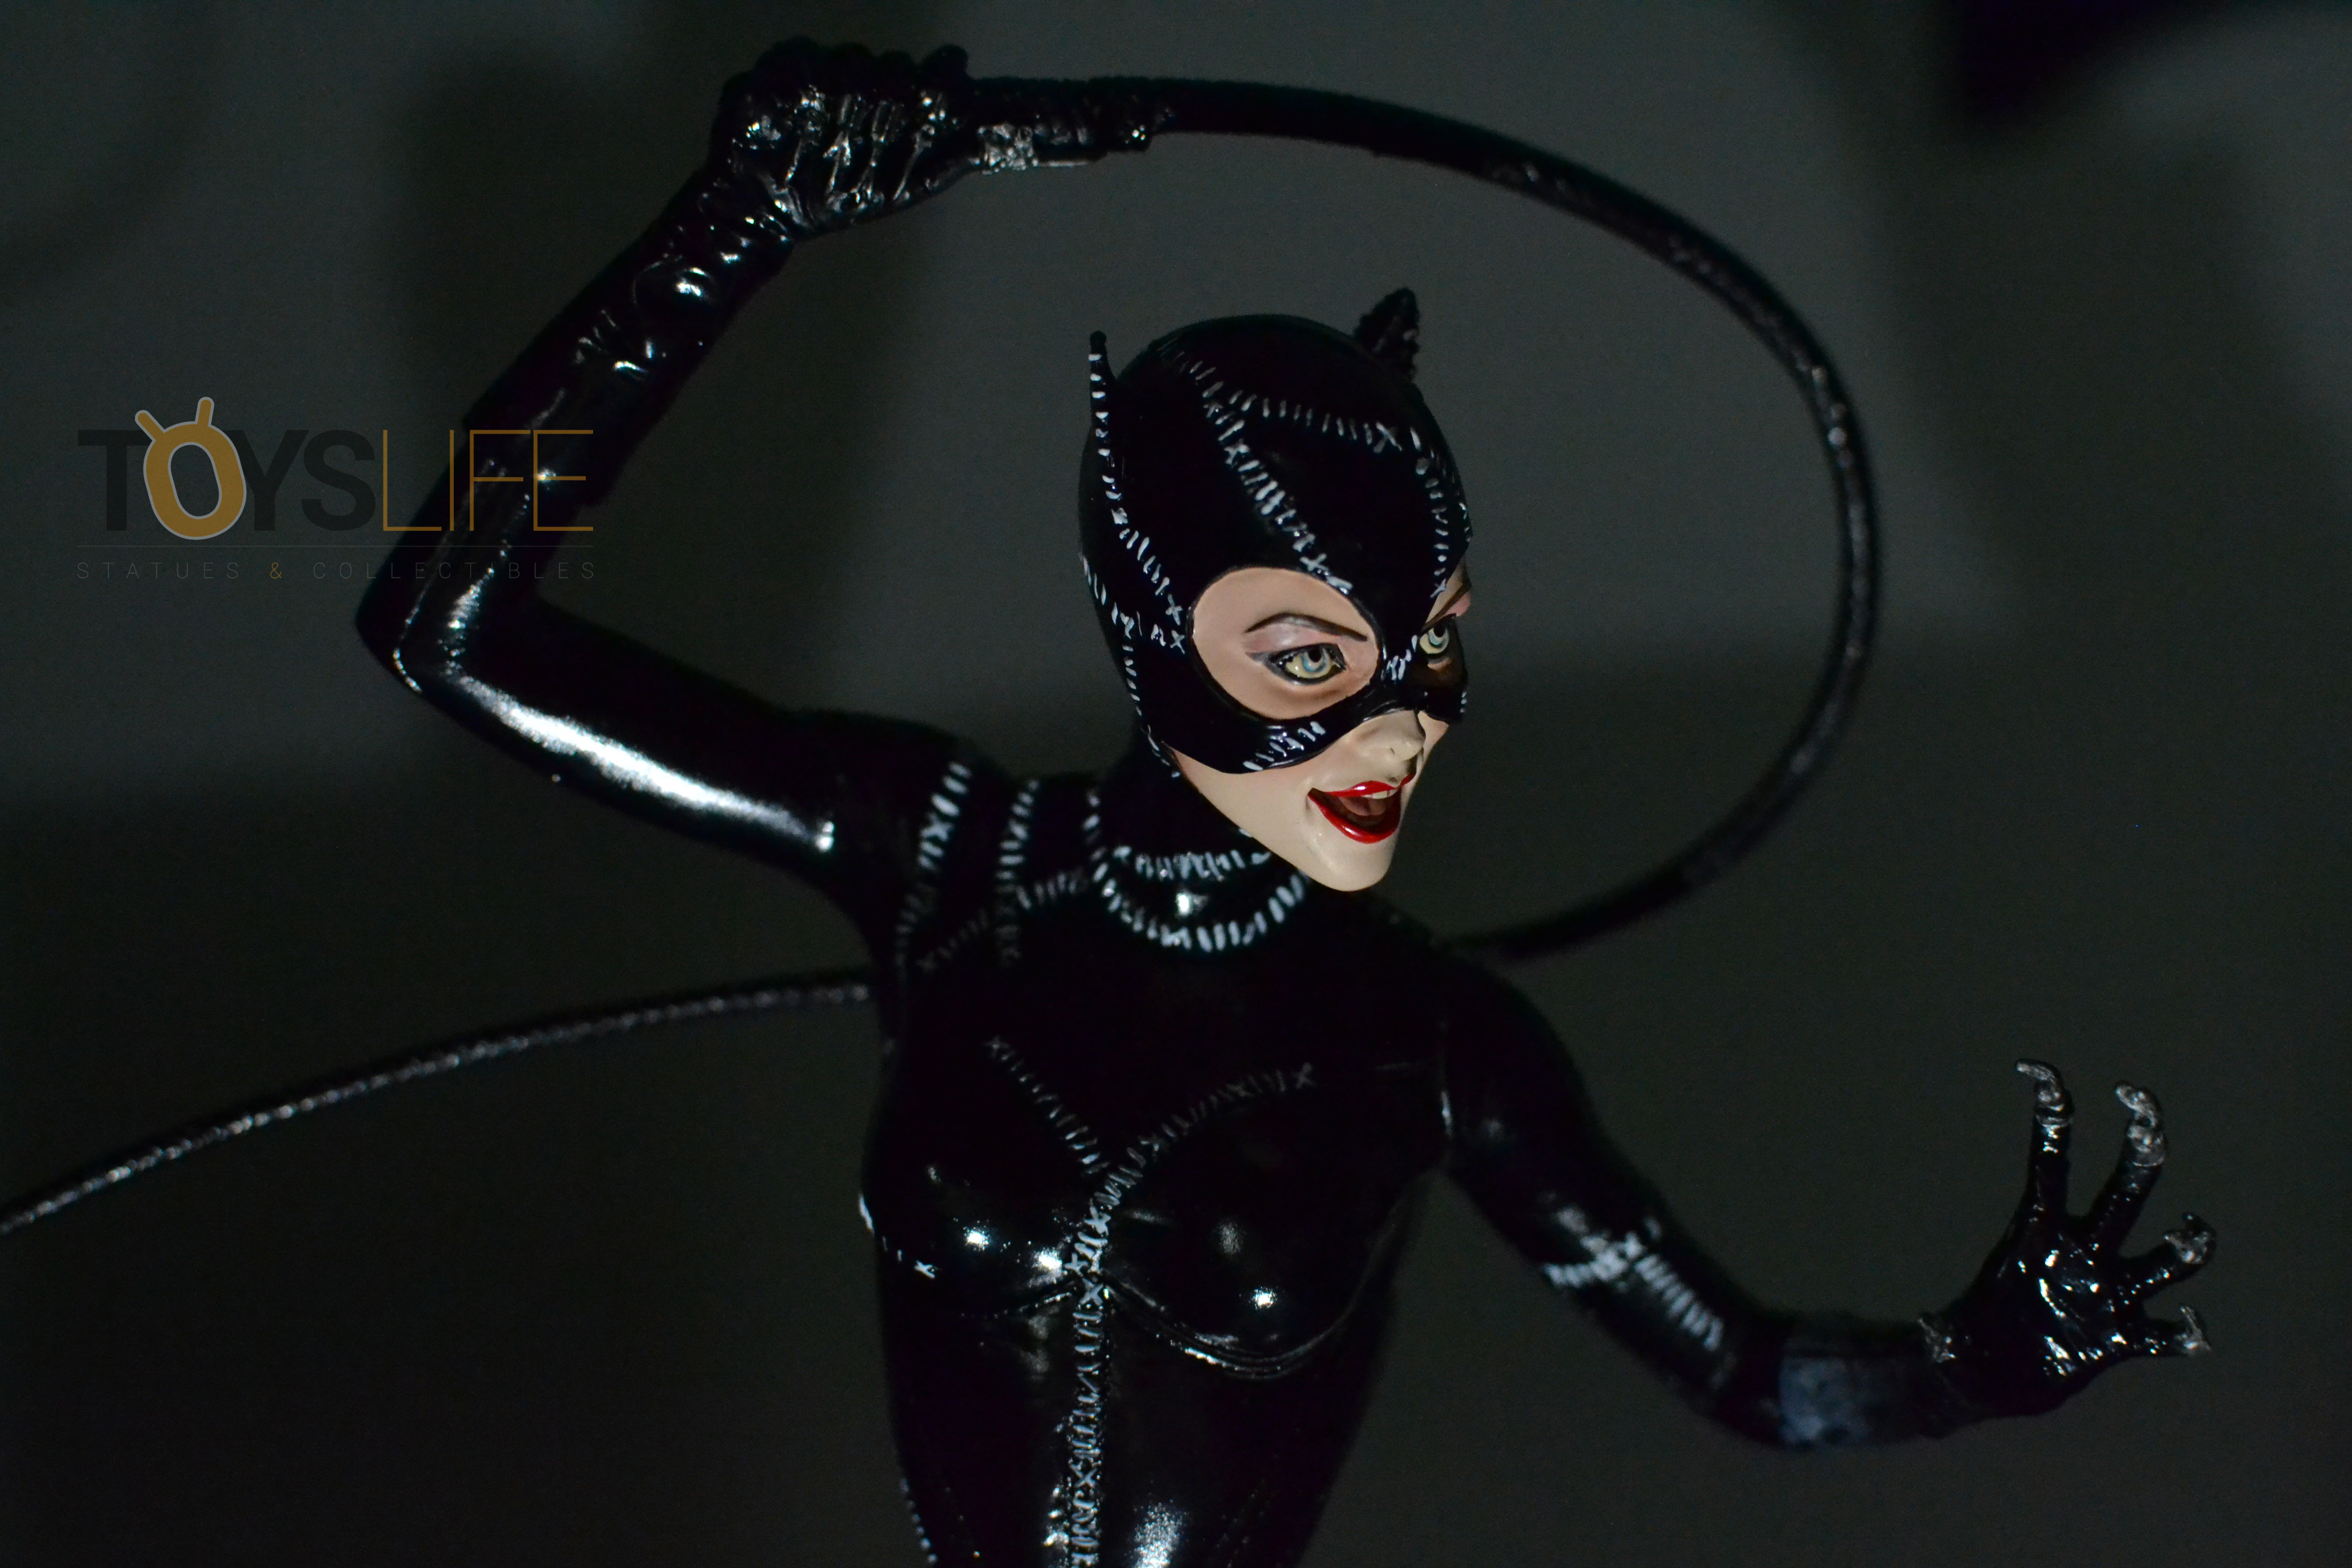 tweeterhead-catwoman-michelle-pfeiffer-maquette-toyslife-review-26